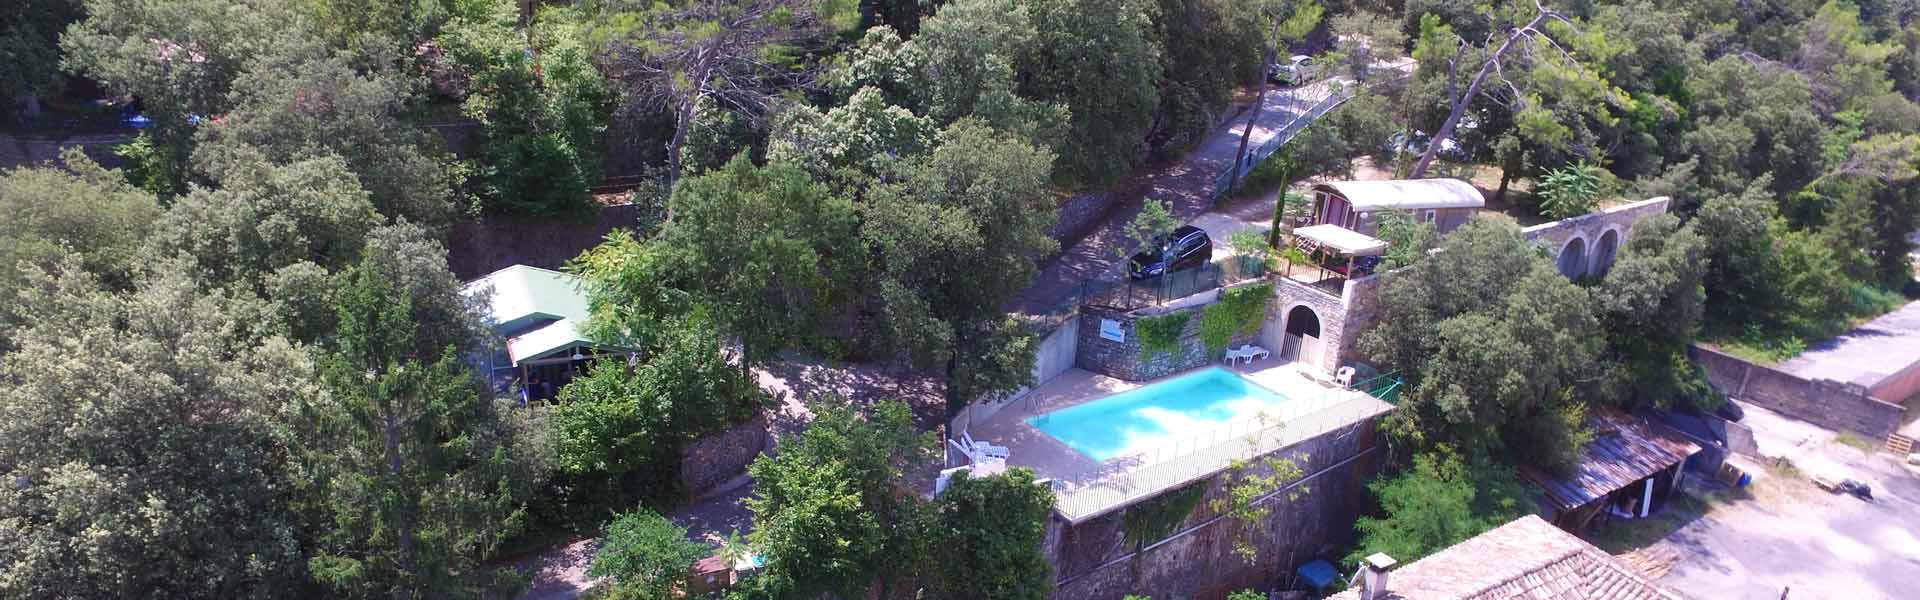 aerial view campsite with swimming pool of saint ambroix gard